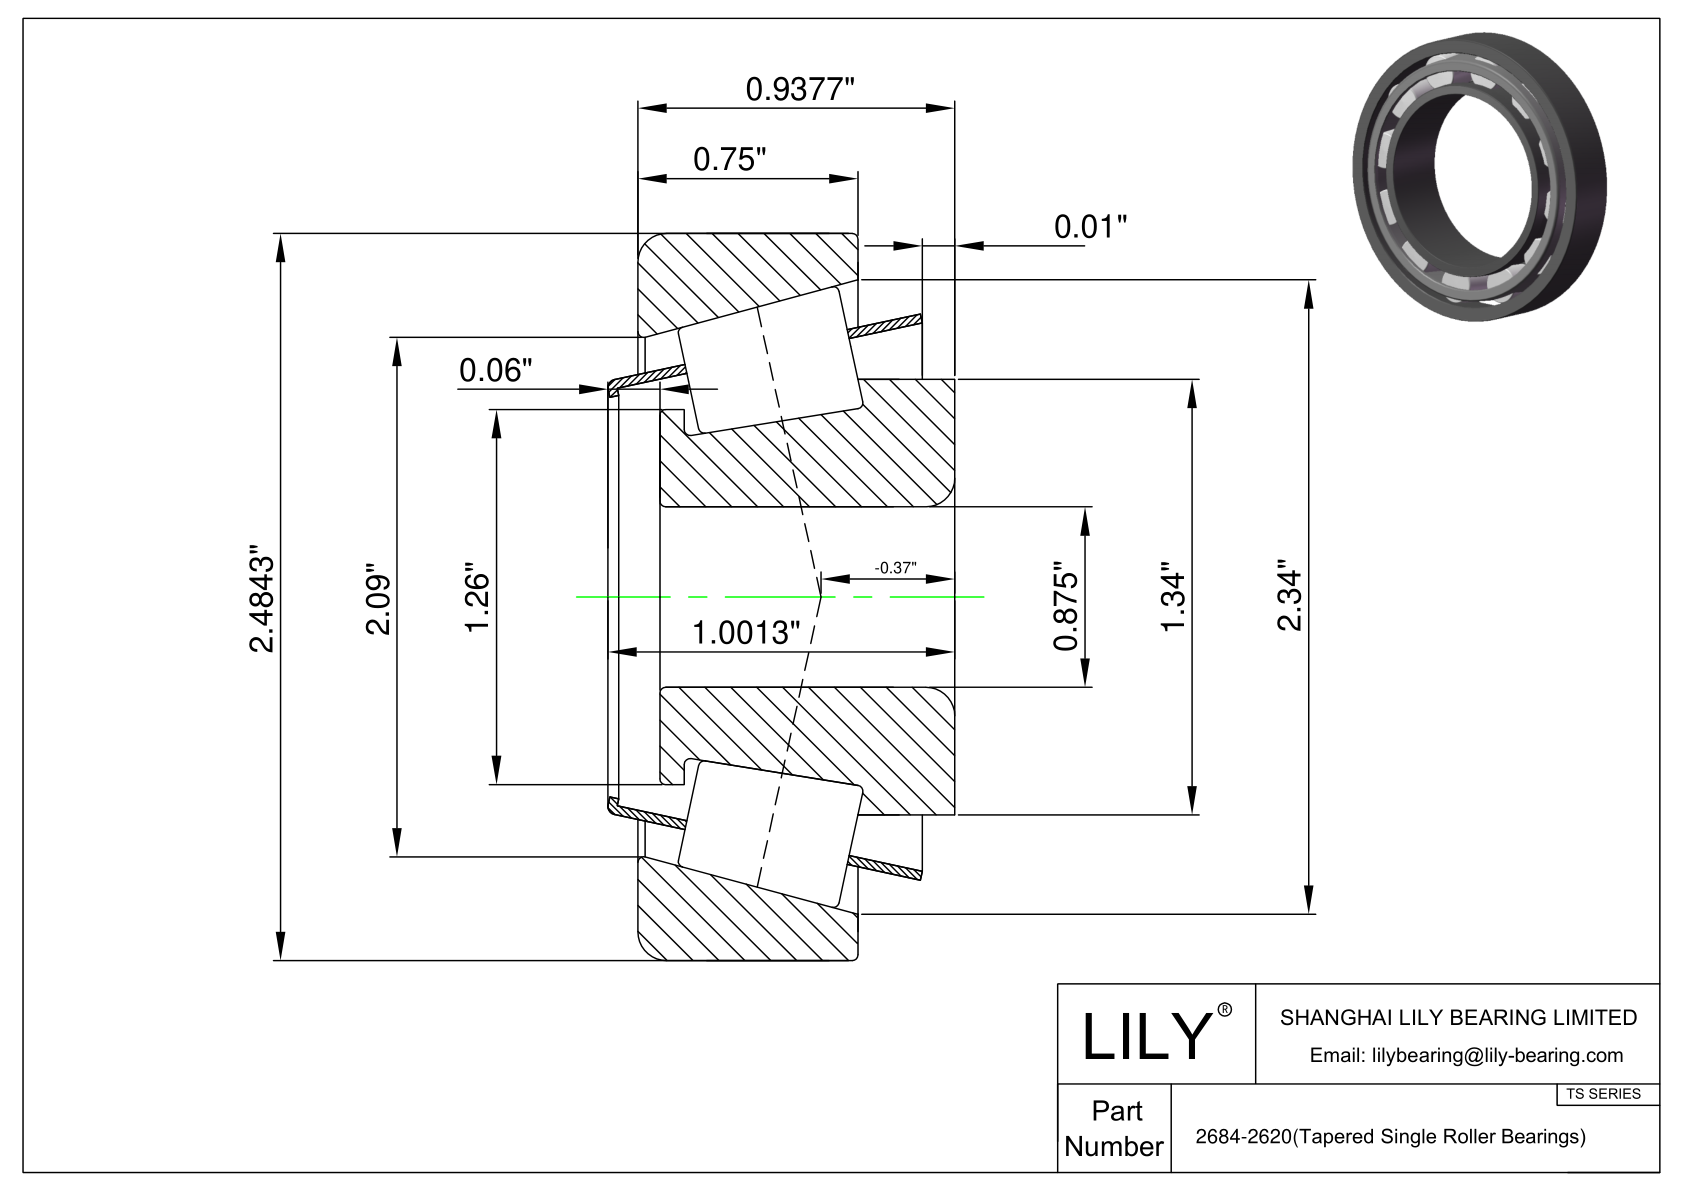 2684-2620 TS (Tapered Single Roller Bearings) (Imperial) cad drawing